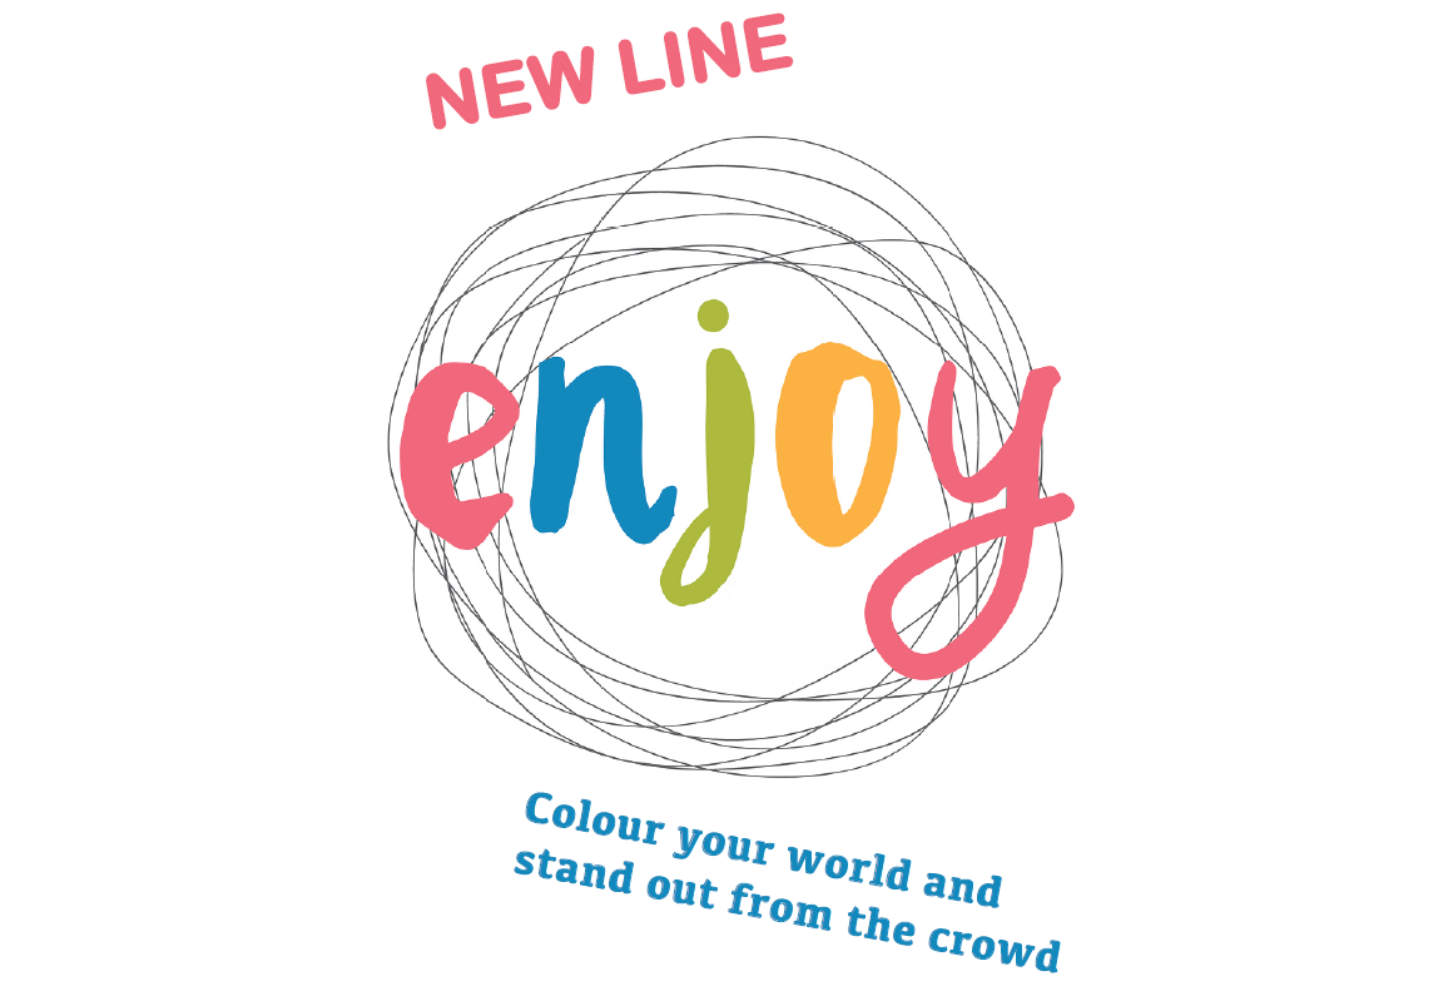 OSQ Launches new packaging line ‘ENJOY’ for fast food with eye-catching designs